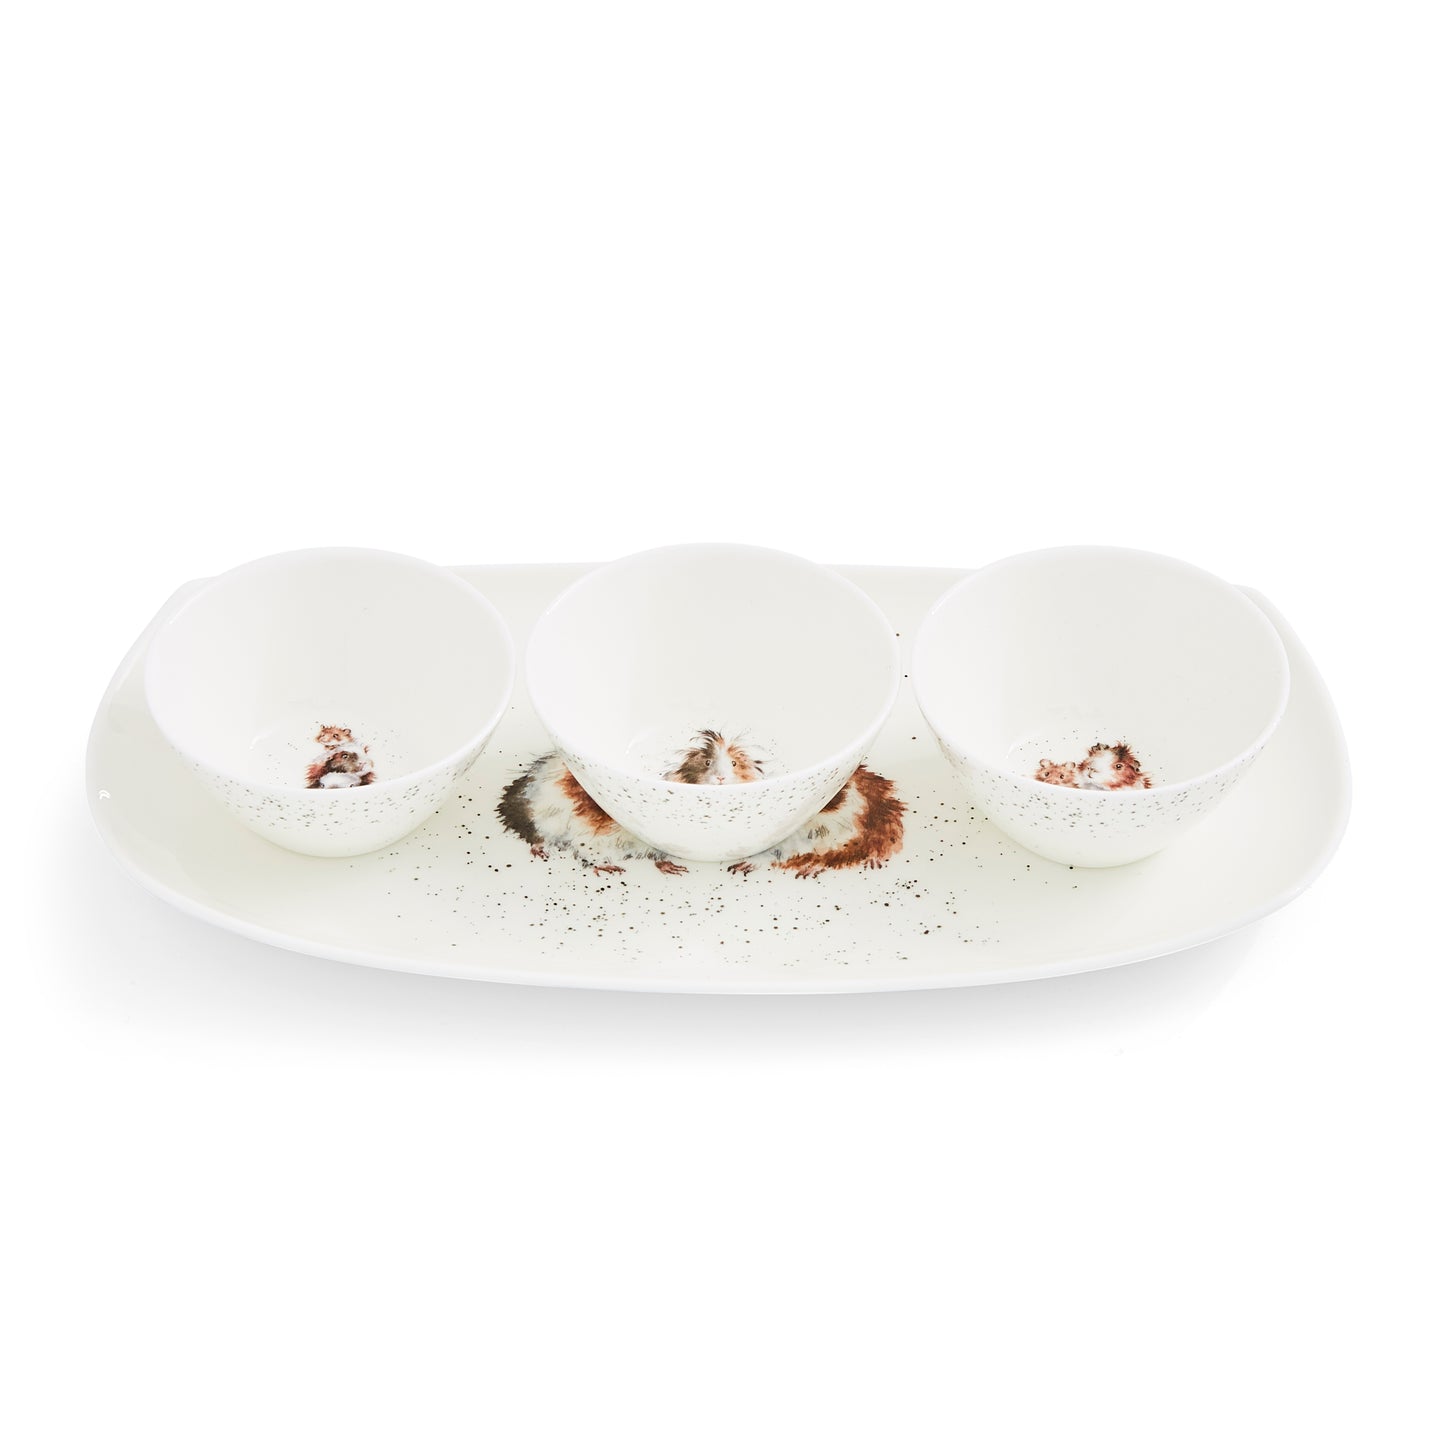 Royal Worcester Wrendale Designs 3 Bowl and Tray Set